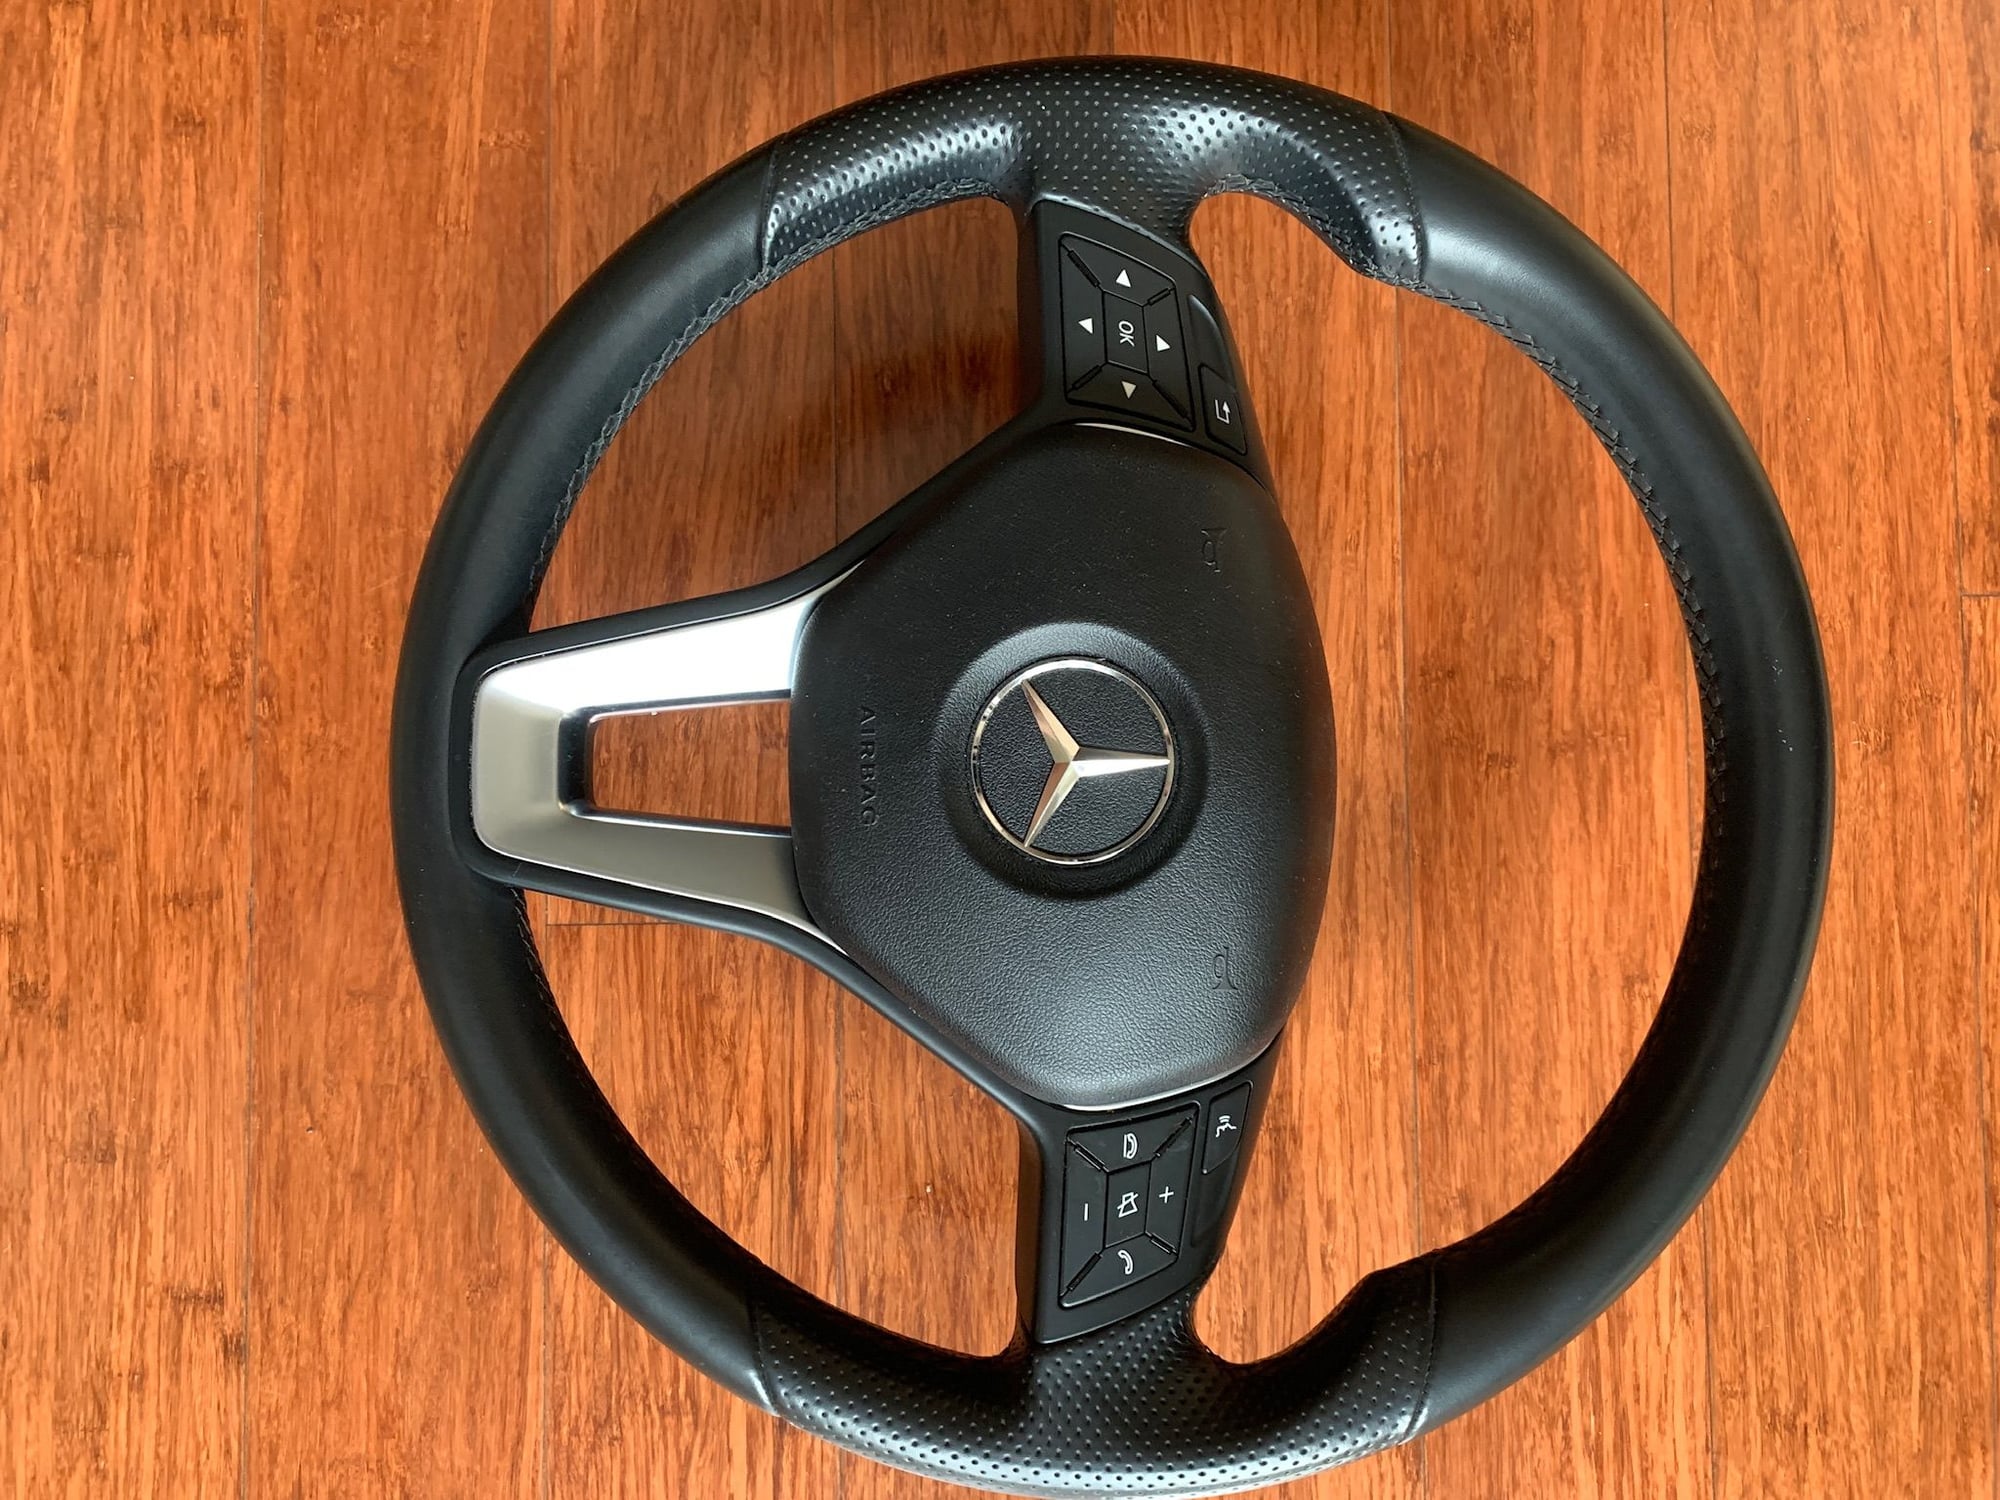 Accessories - Sport MB Steering wheel with Airbag 21846003189e38 - Used - 2010 to 2017 Mercedes-Benz E350 - 2010 to 2017 Mercedes-Benz E550 - Sonoma, CA 95476, United States